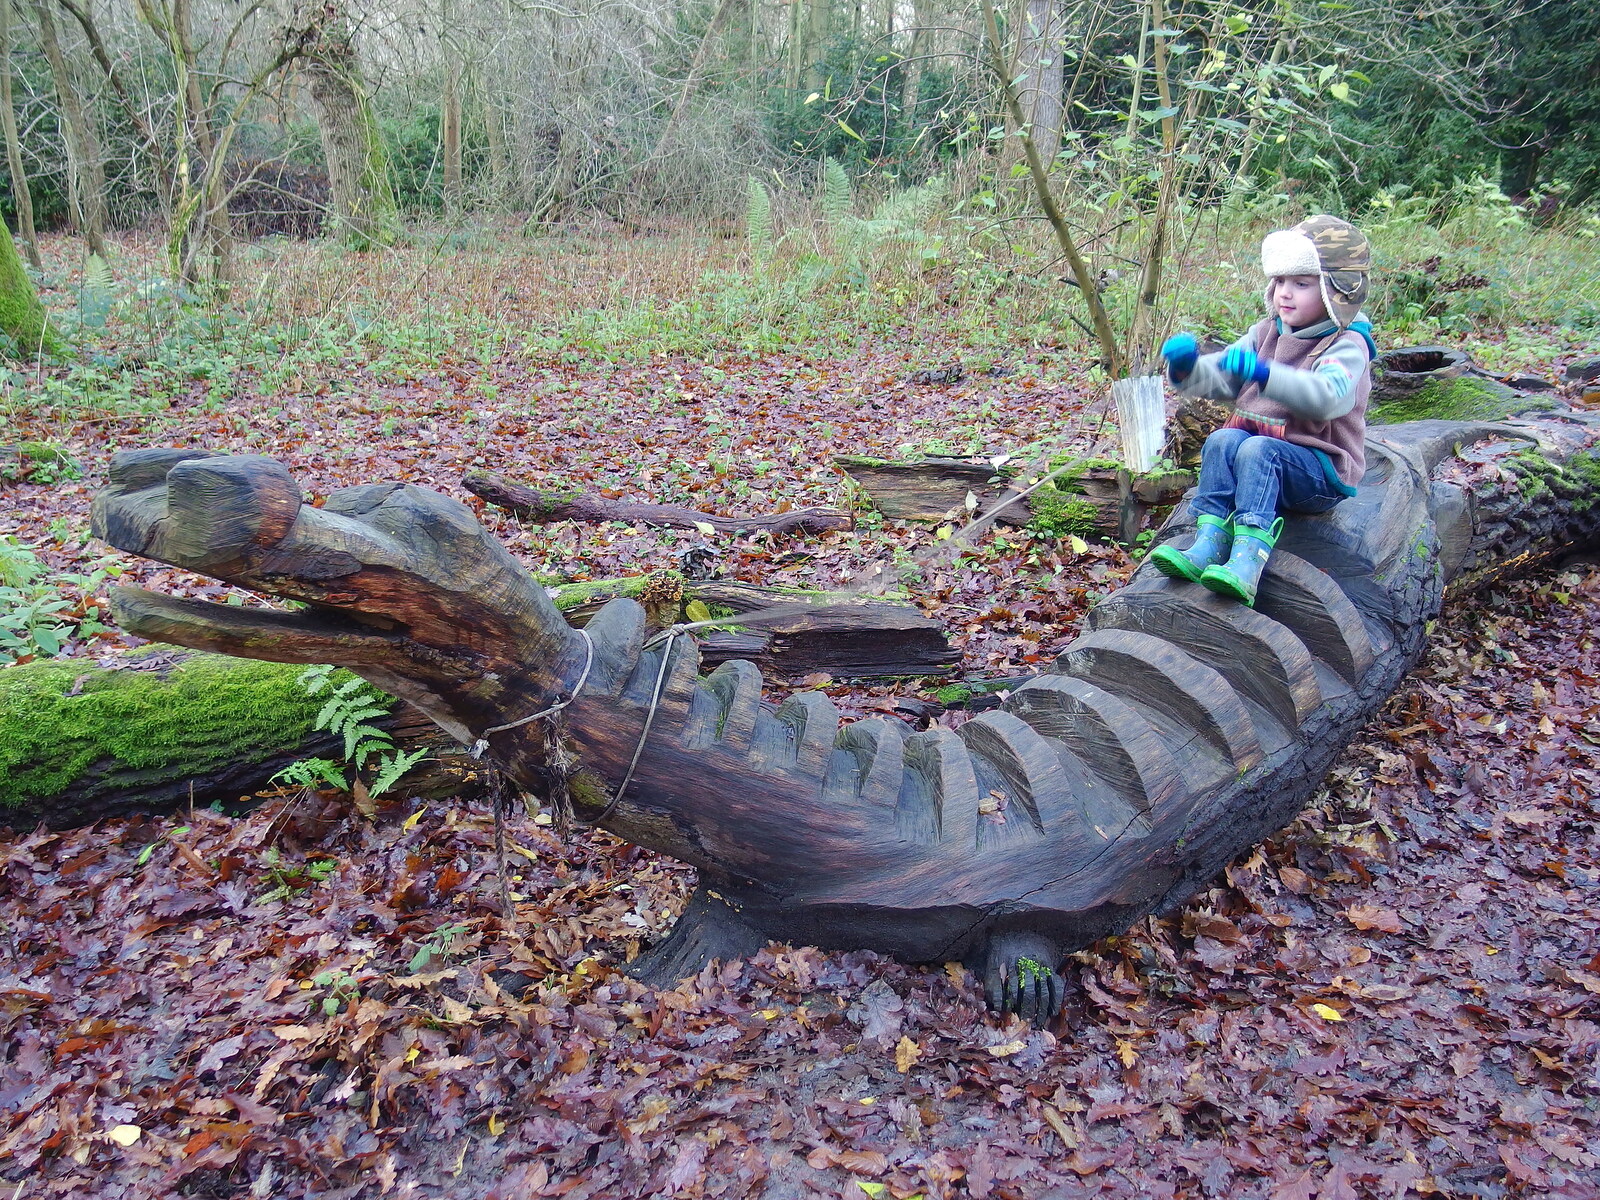 Fred rides the wooden dragon from A Boxing Day Walk, Thornham Estate, Suffolk - 26th December 2013